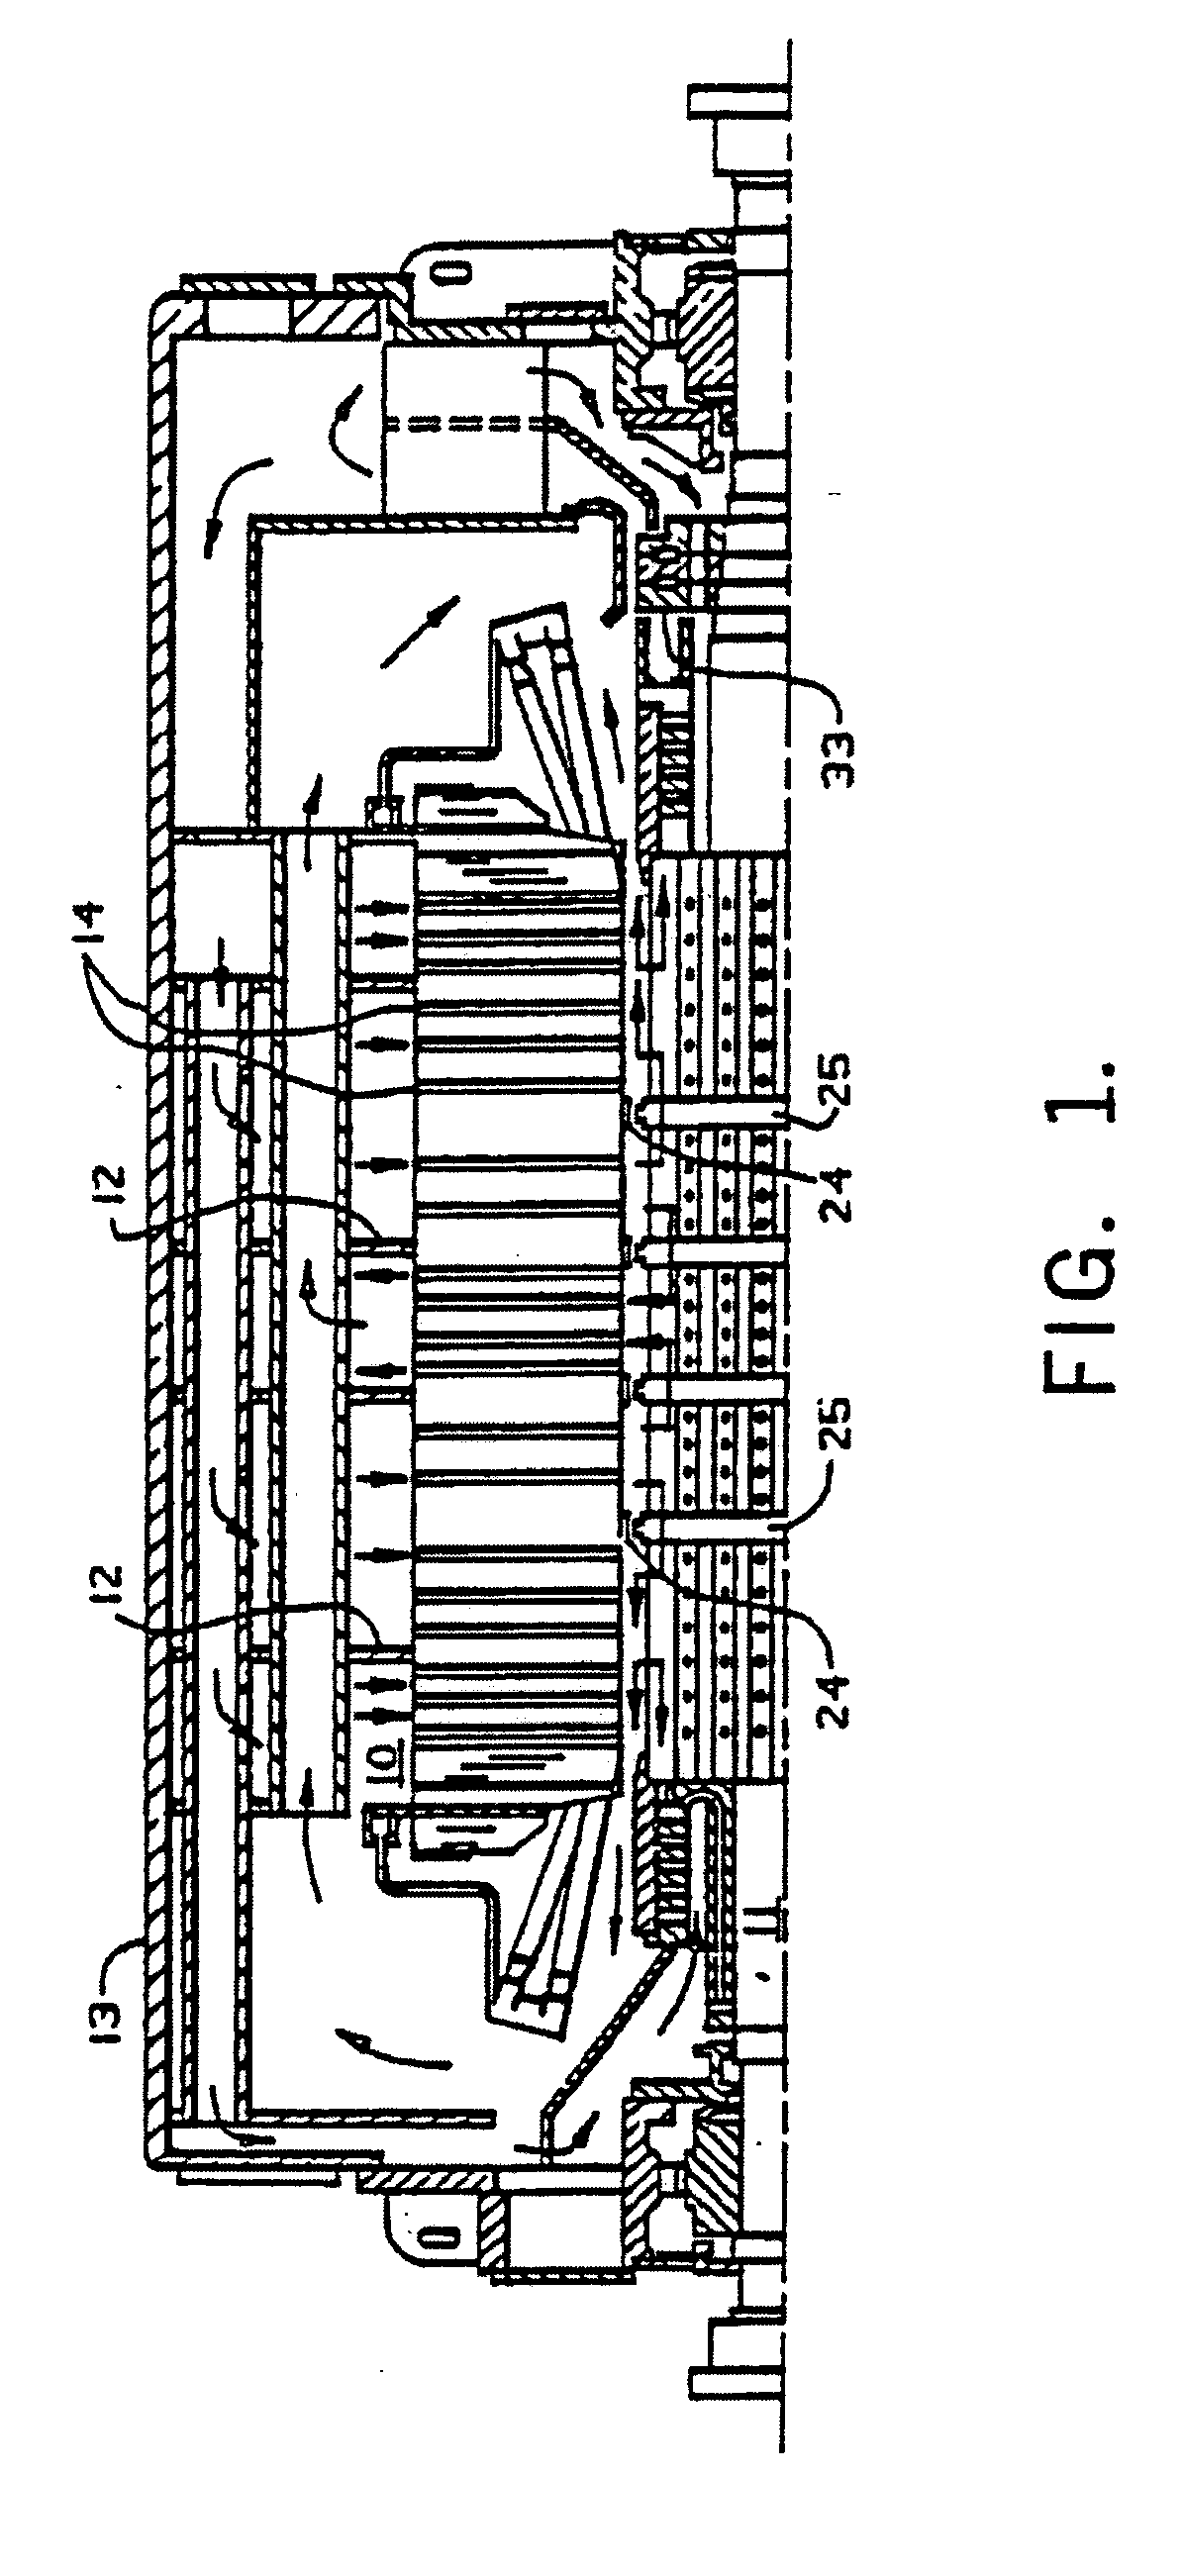 Air gap baffle assembly for gas-cooled turbine generator and method of installing